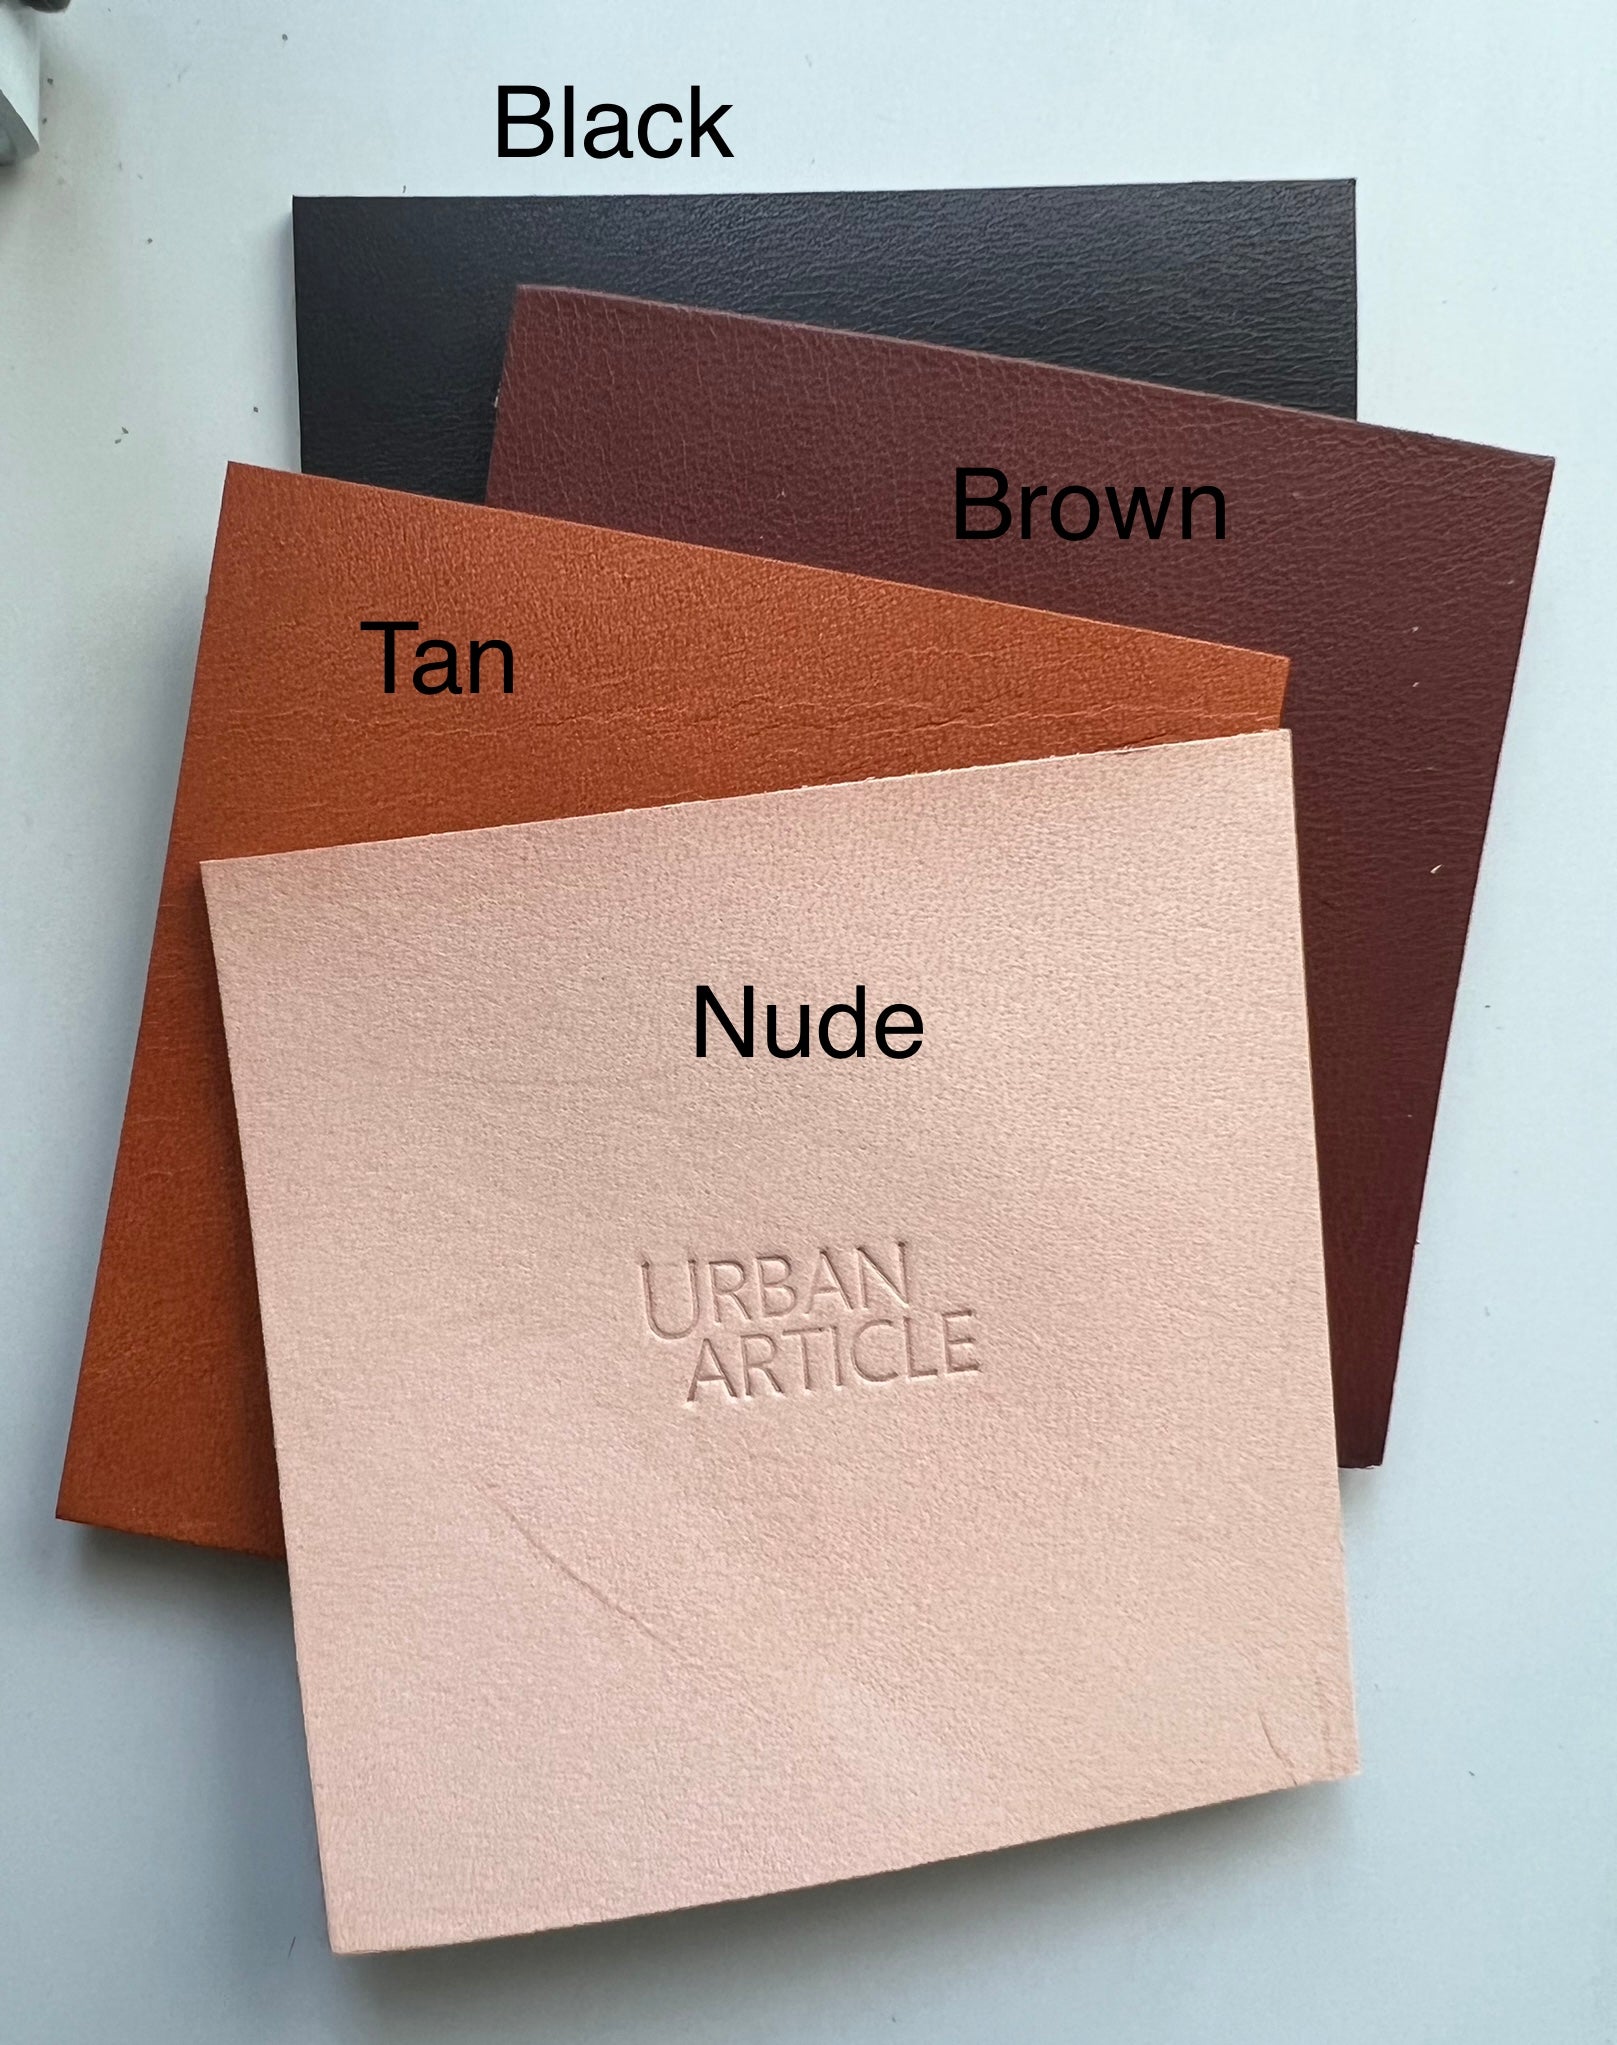 Color swatches show black, brown, tan, and nude leather options.